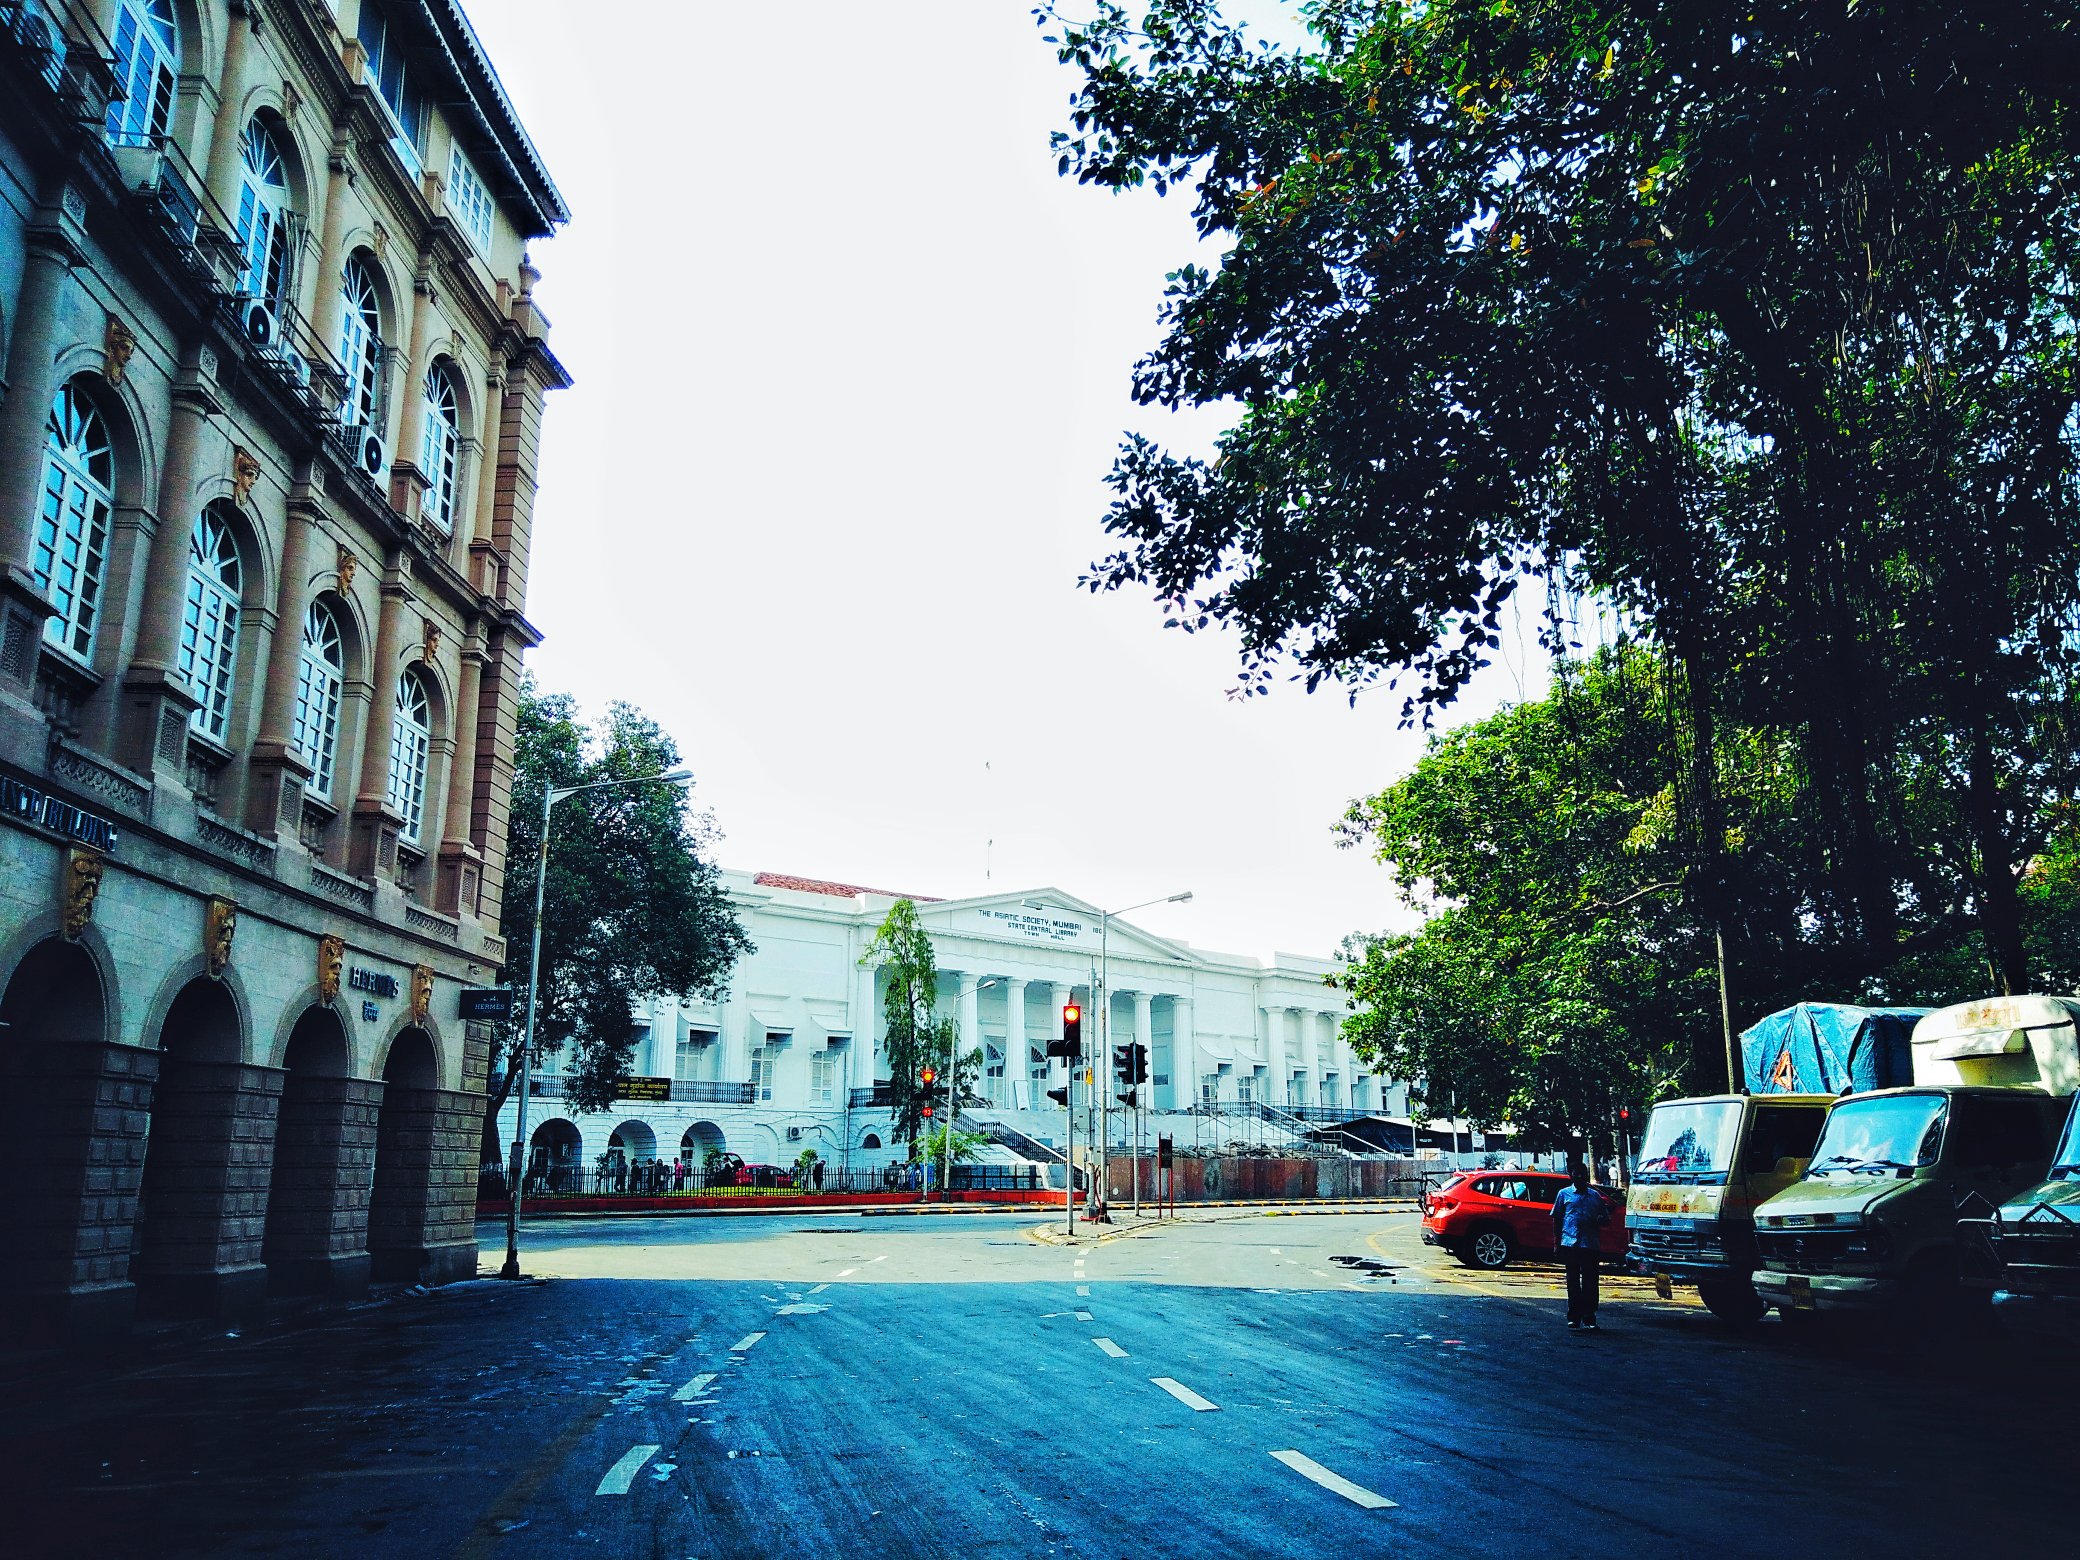 Photo from Elphinstone Circle near Asiatic Library (Town Hall) now known as Horniman Circle. Clicked in 2018.